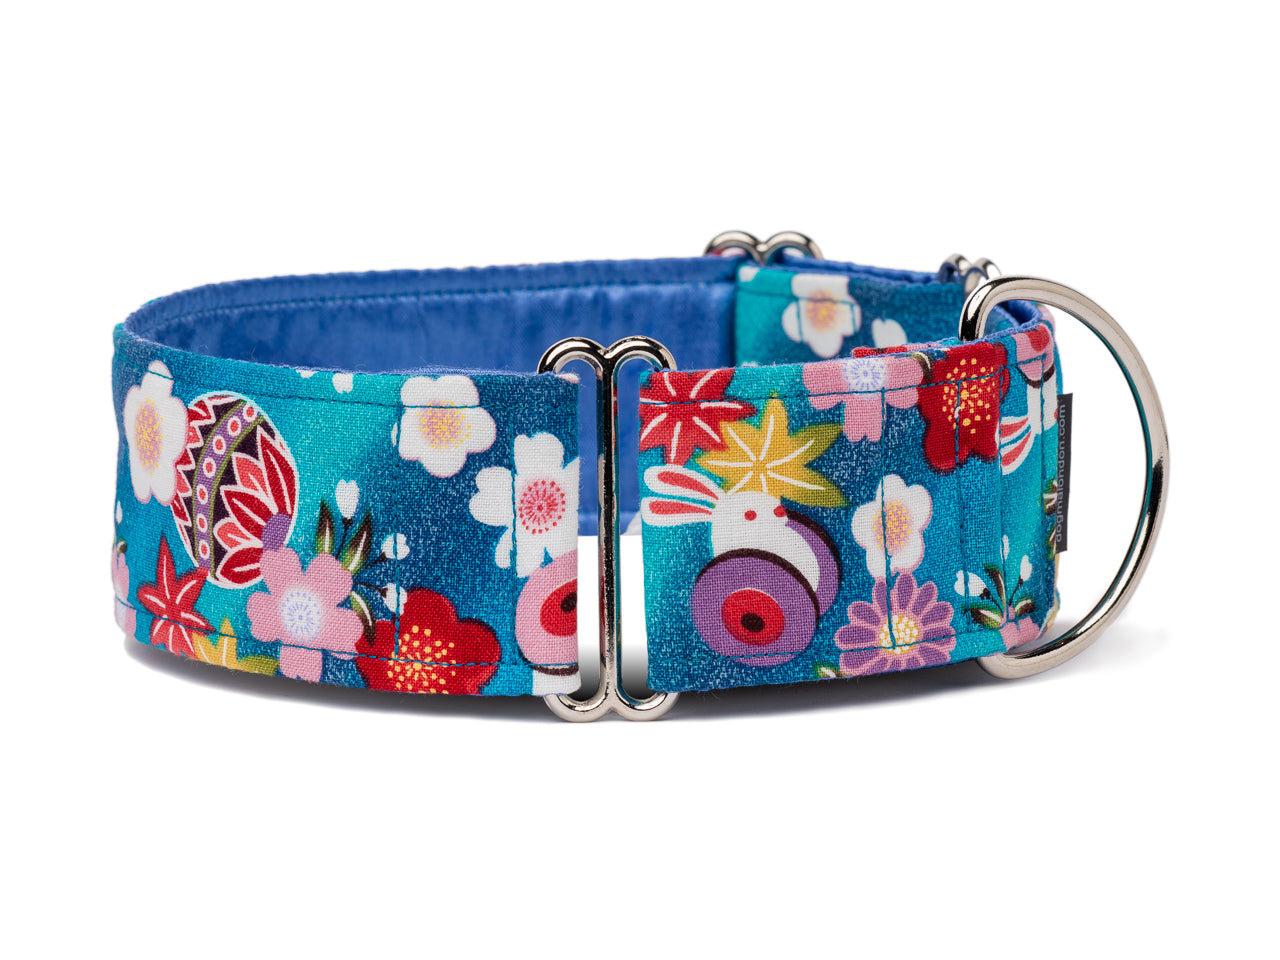 Flowers and bunnies collar with an Asian flair is perfect for the sophisticated yet playful pup!